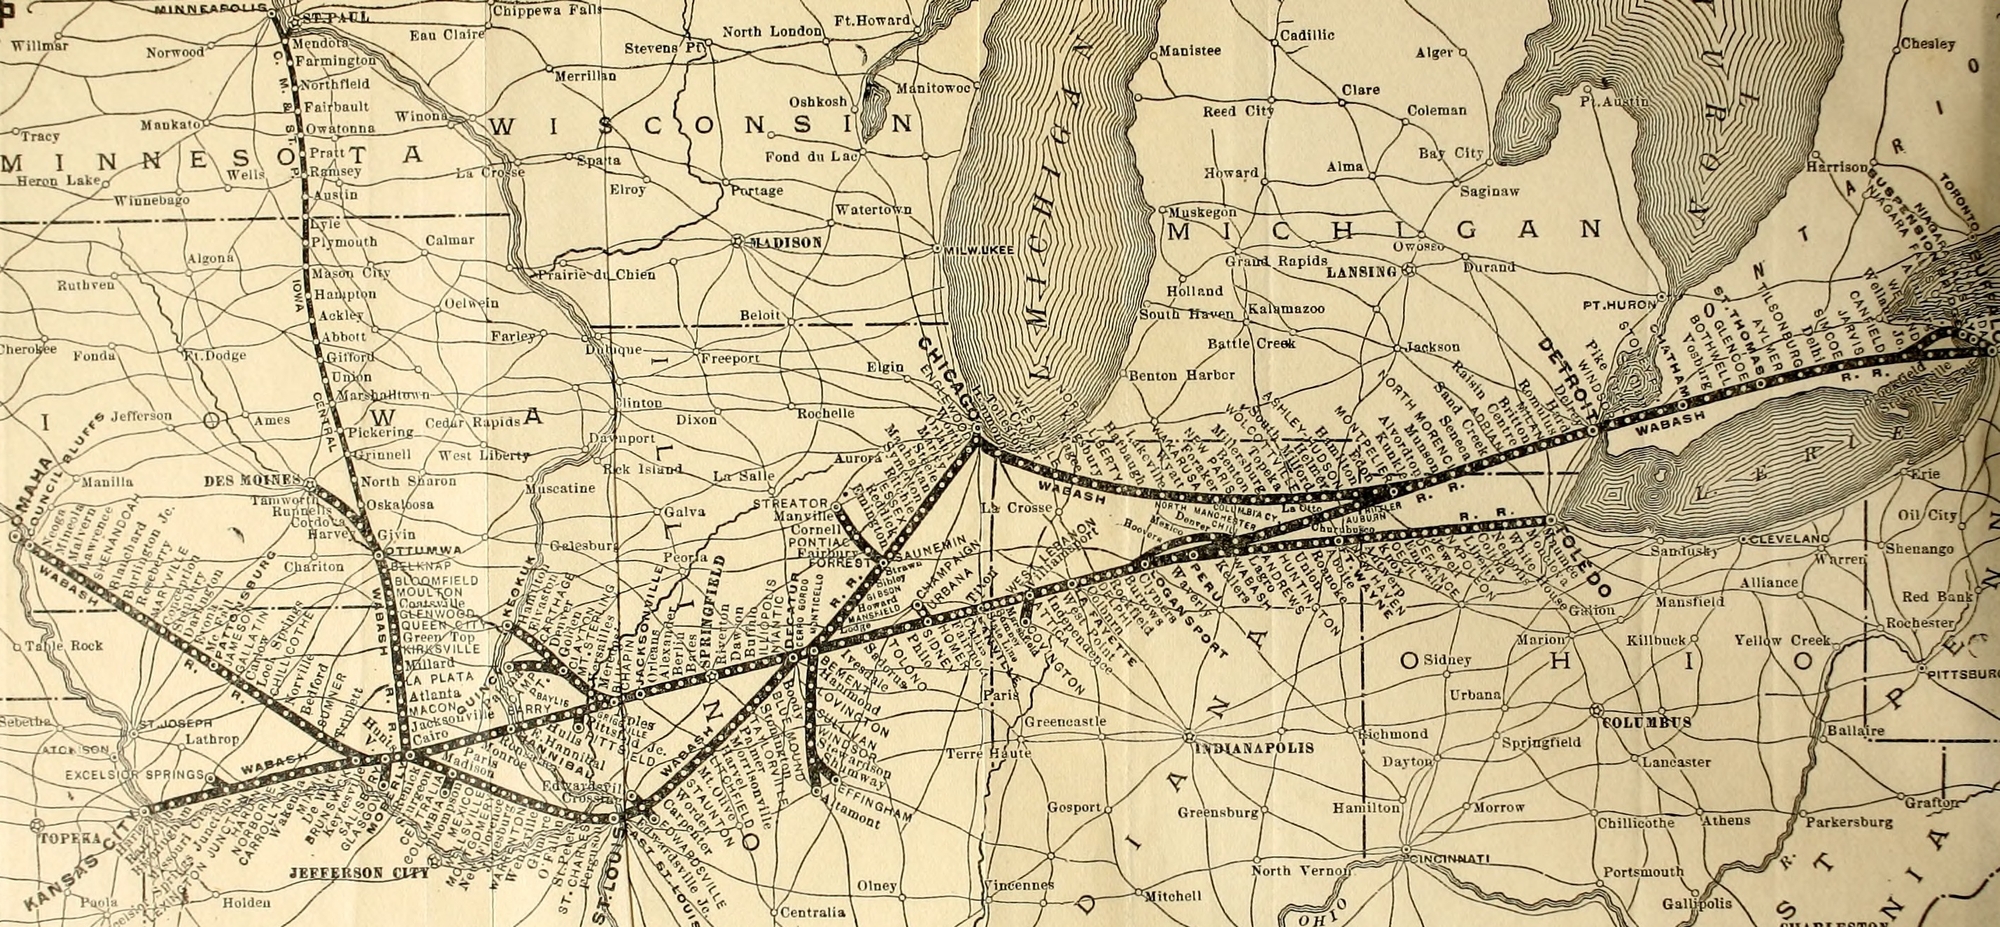 Route network in the year 1899